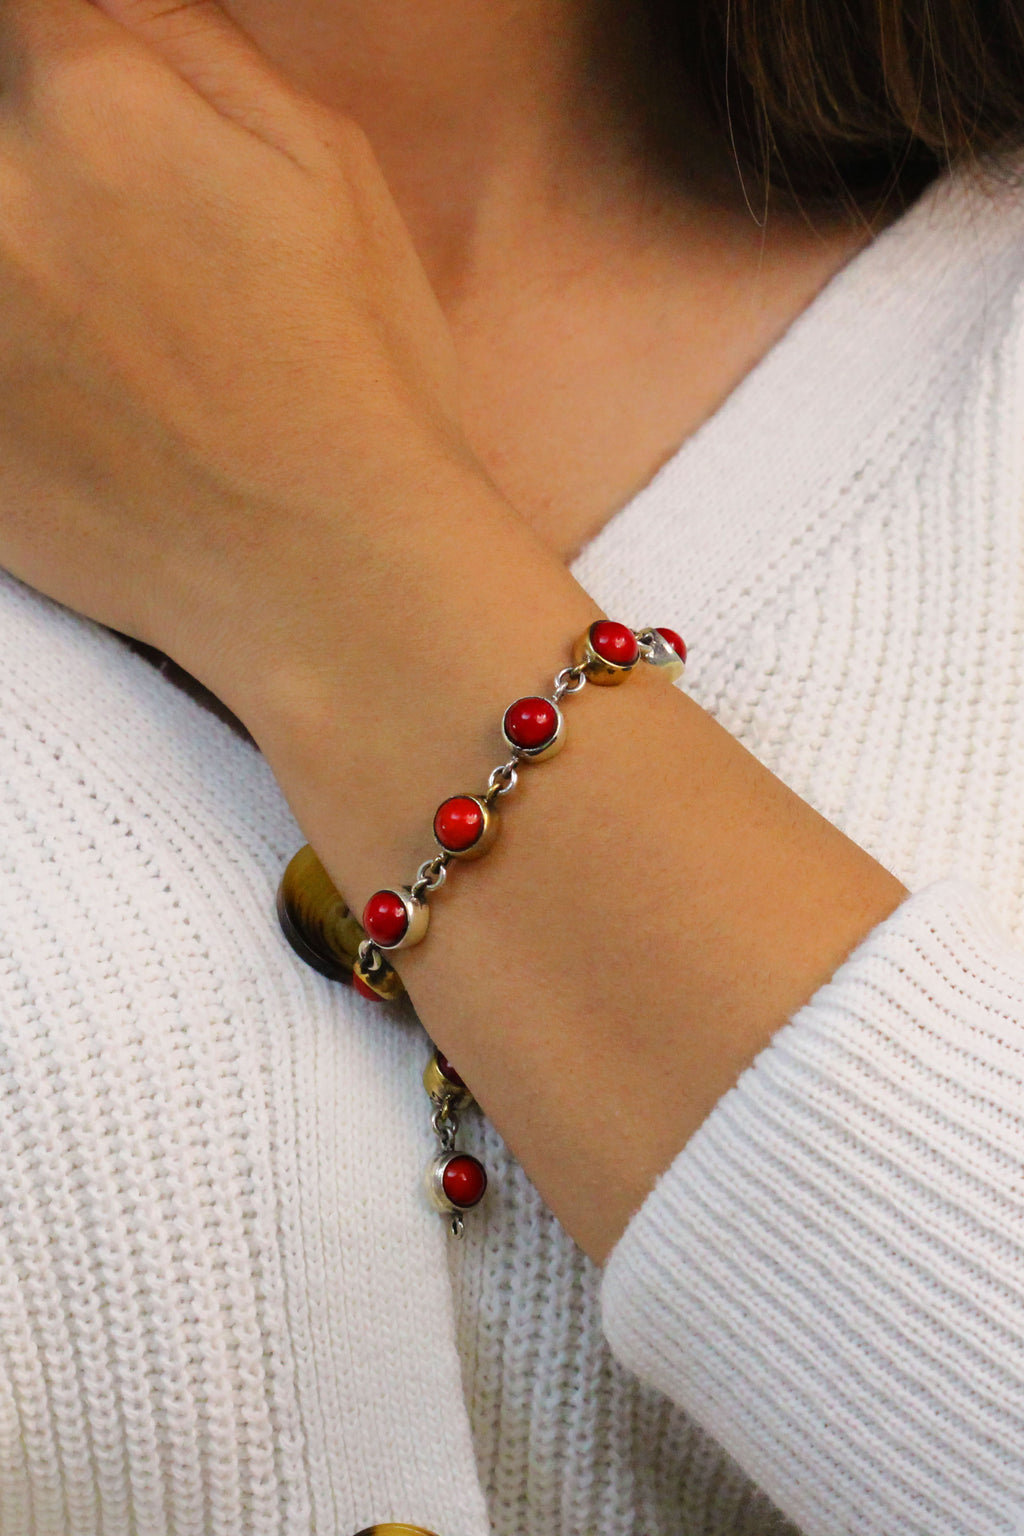 Authentic Handmade Sterling Silver Bracelet With Coral (NG201015737)